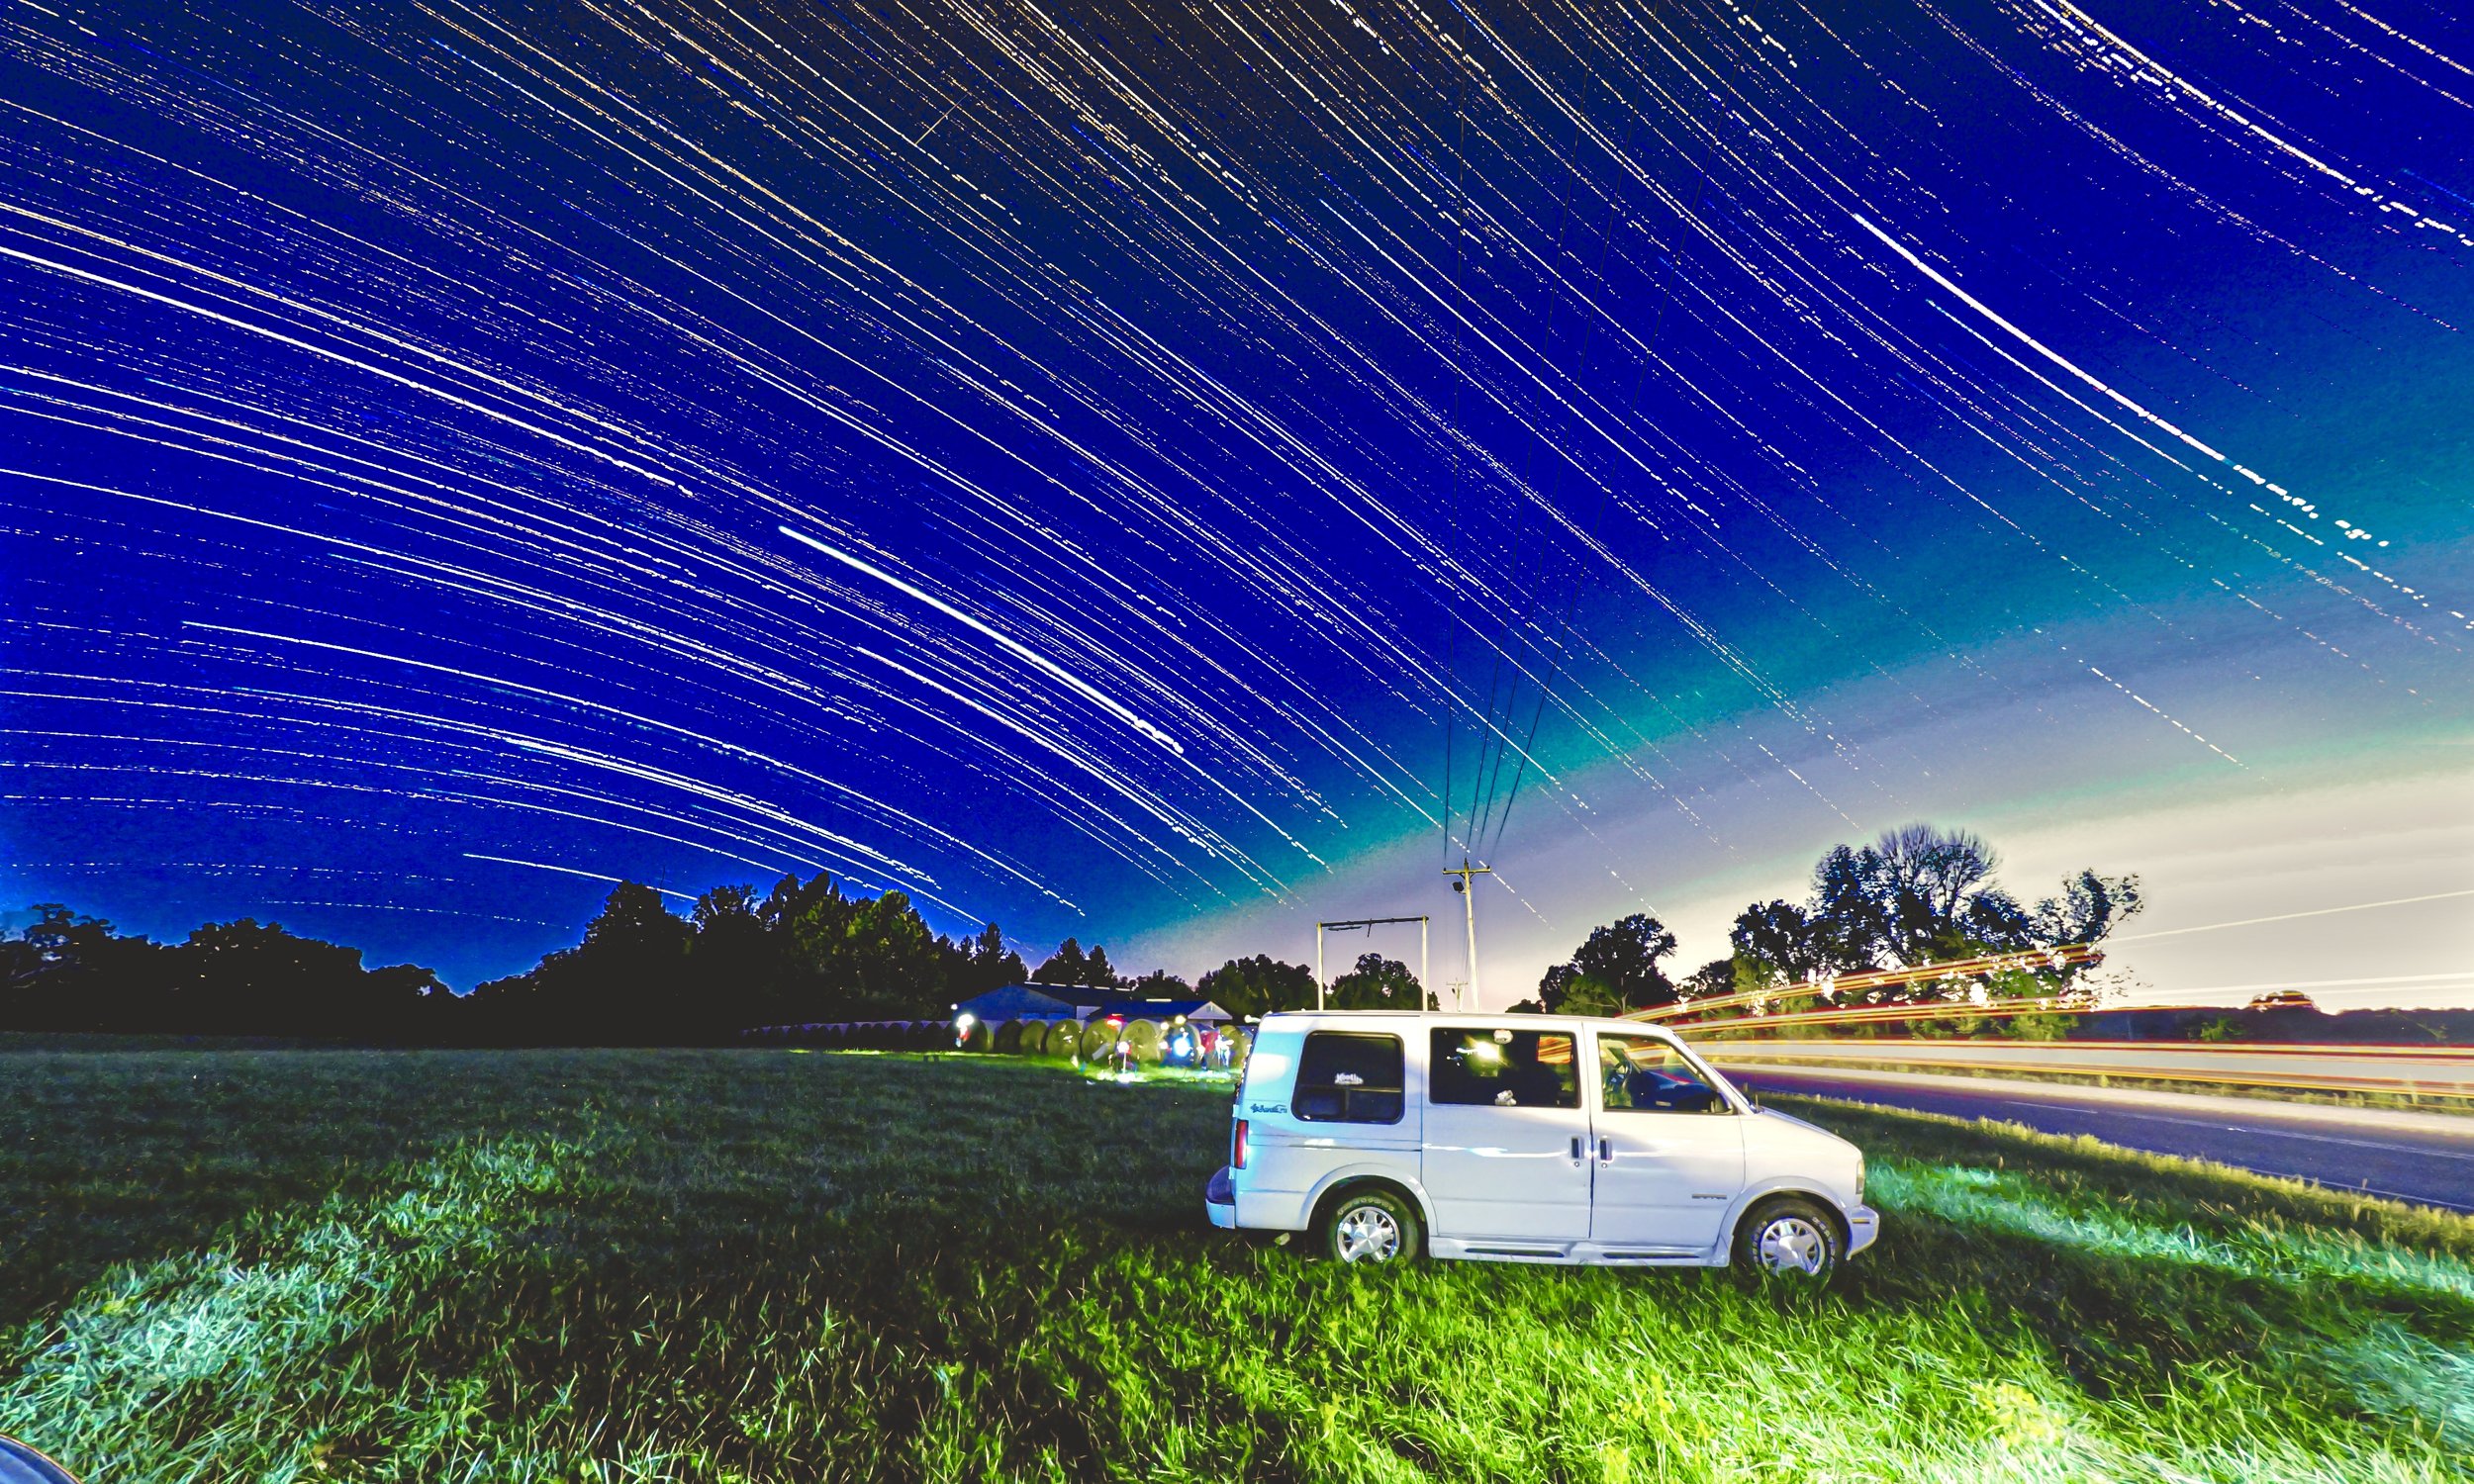 Star Trails over Freedom, IN